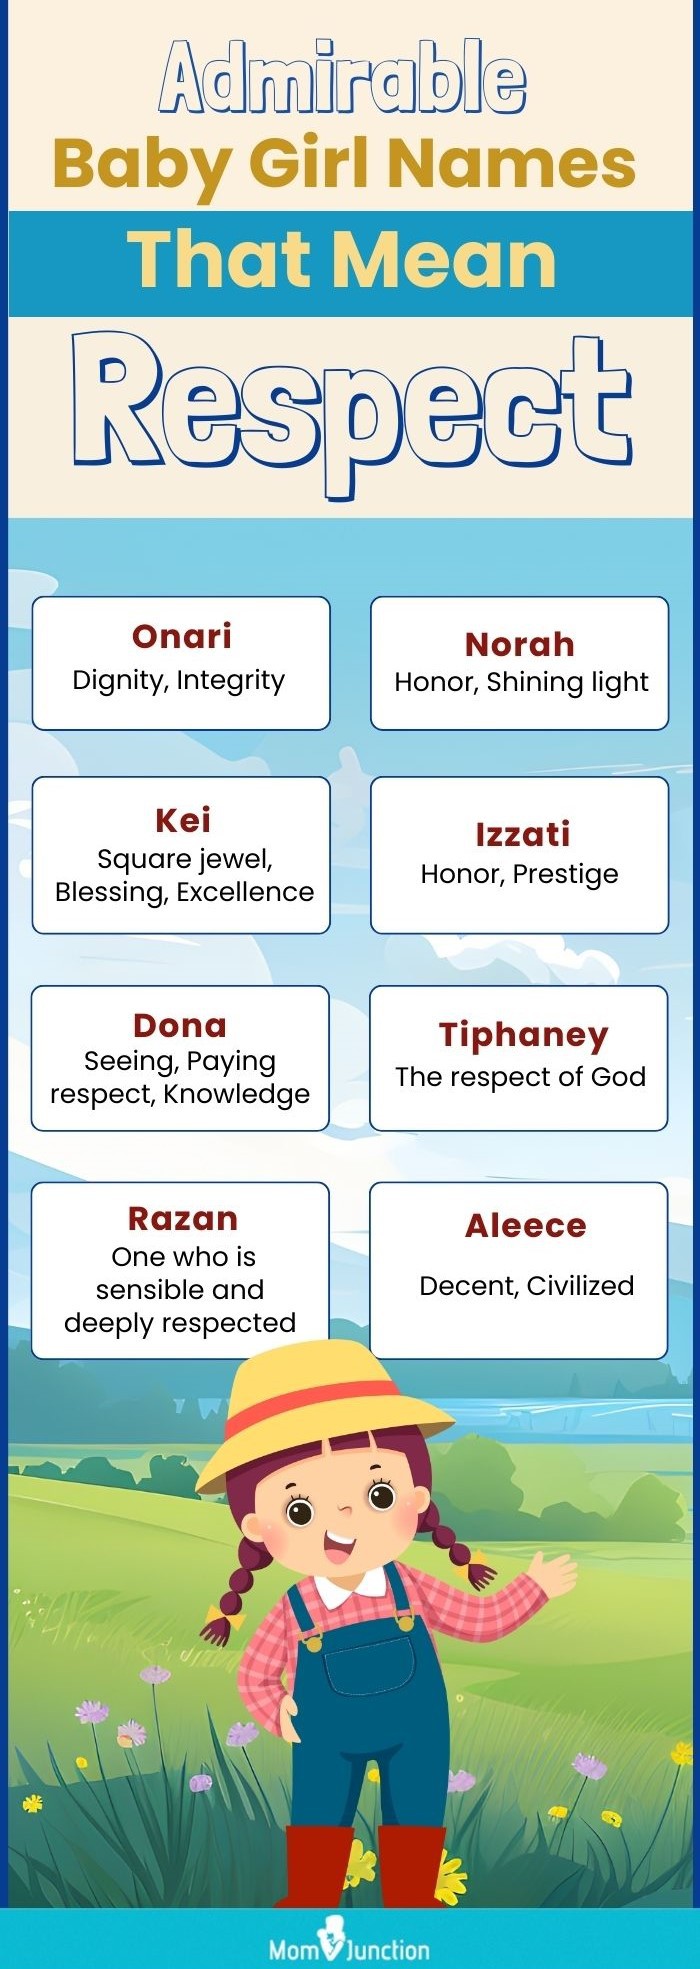 admirable baby girl names that mean respect(infographic)